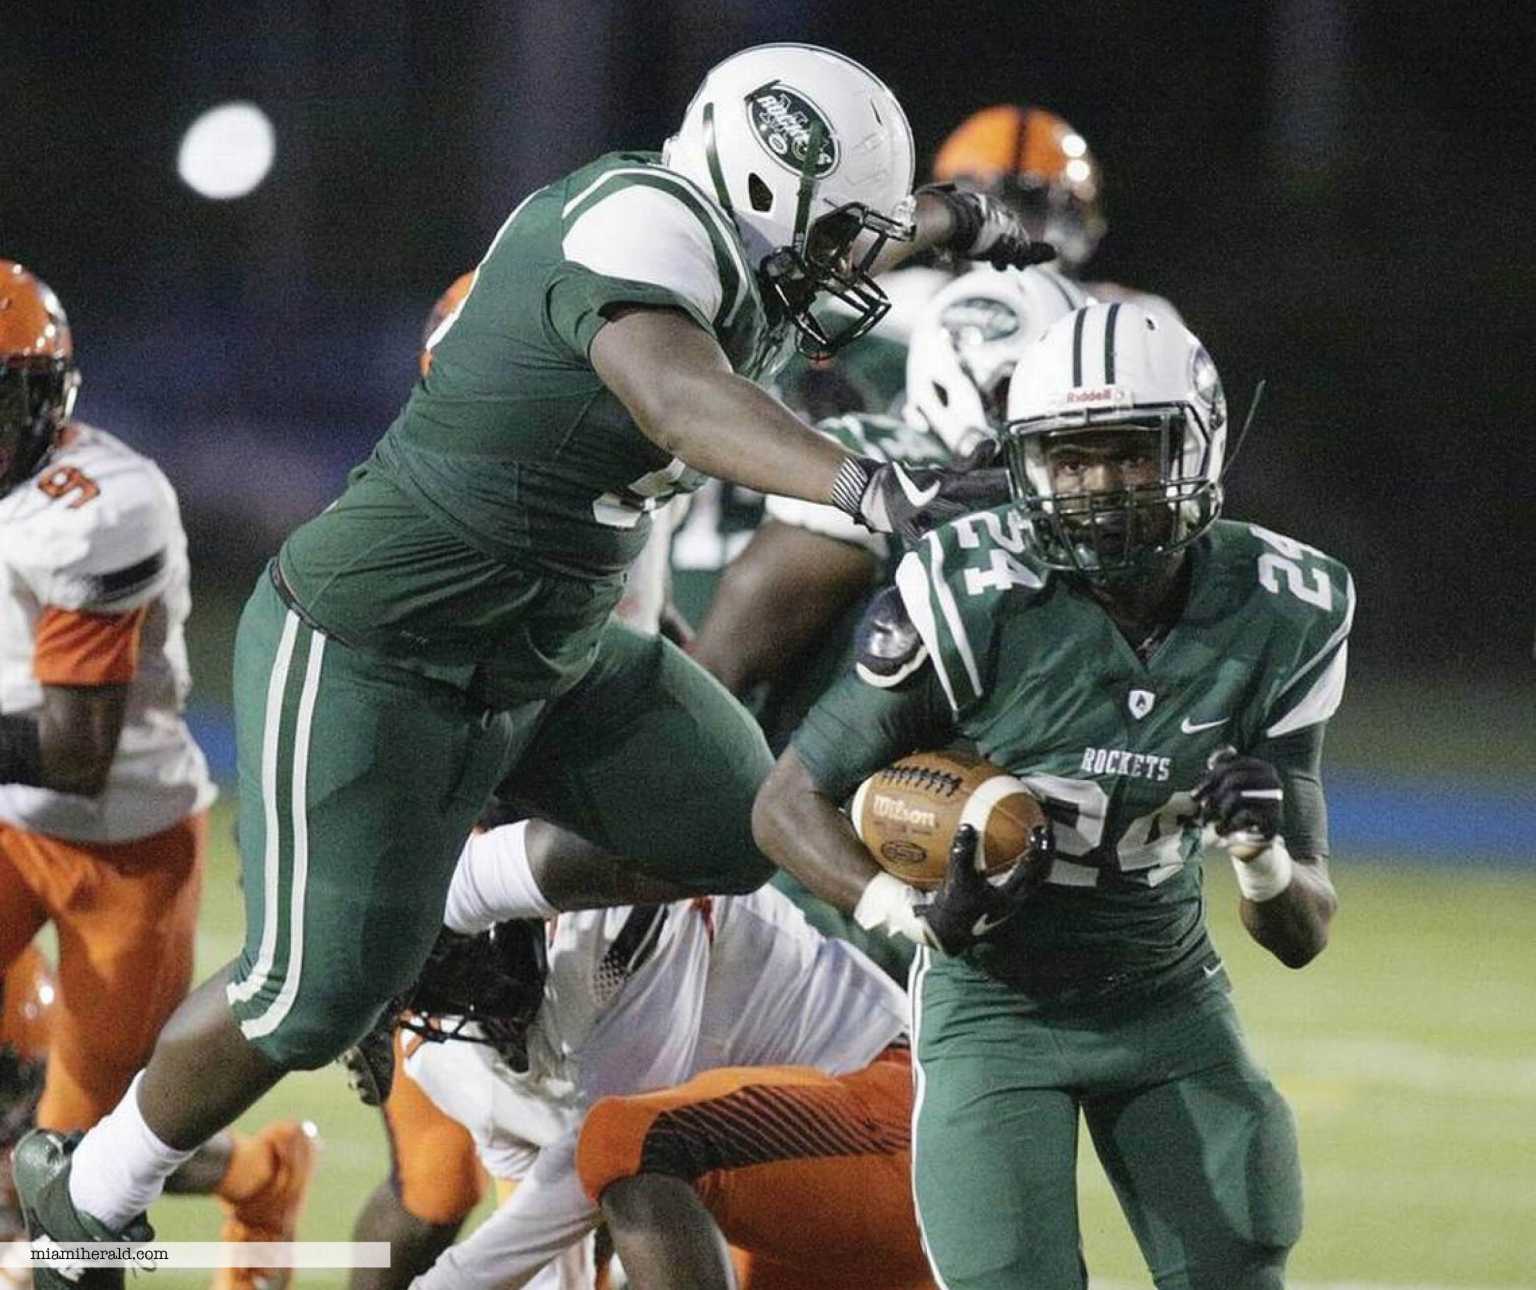 Miami Central Football 2021 Team Preview ITG Next